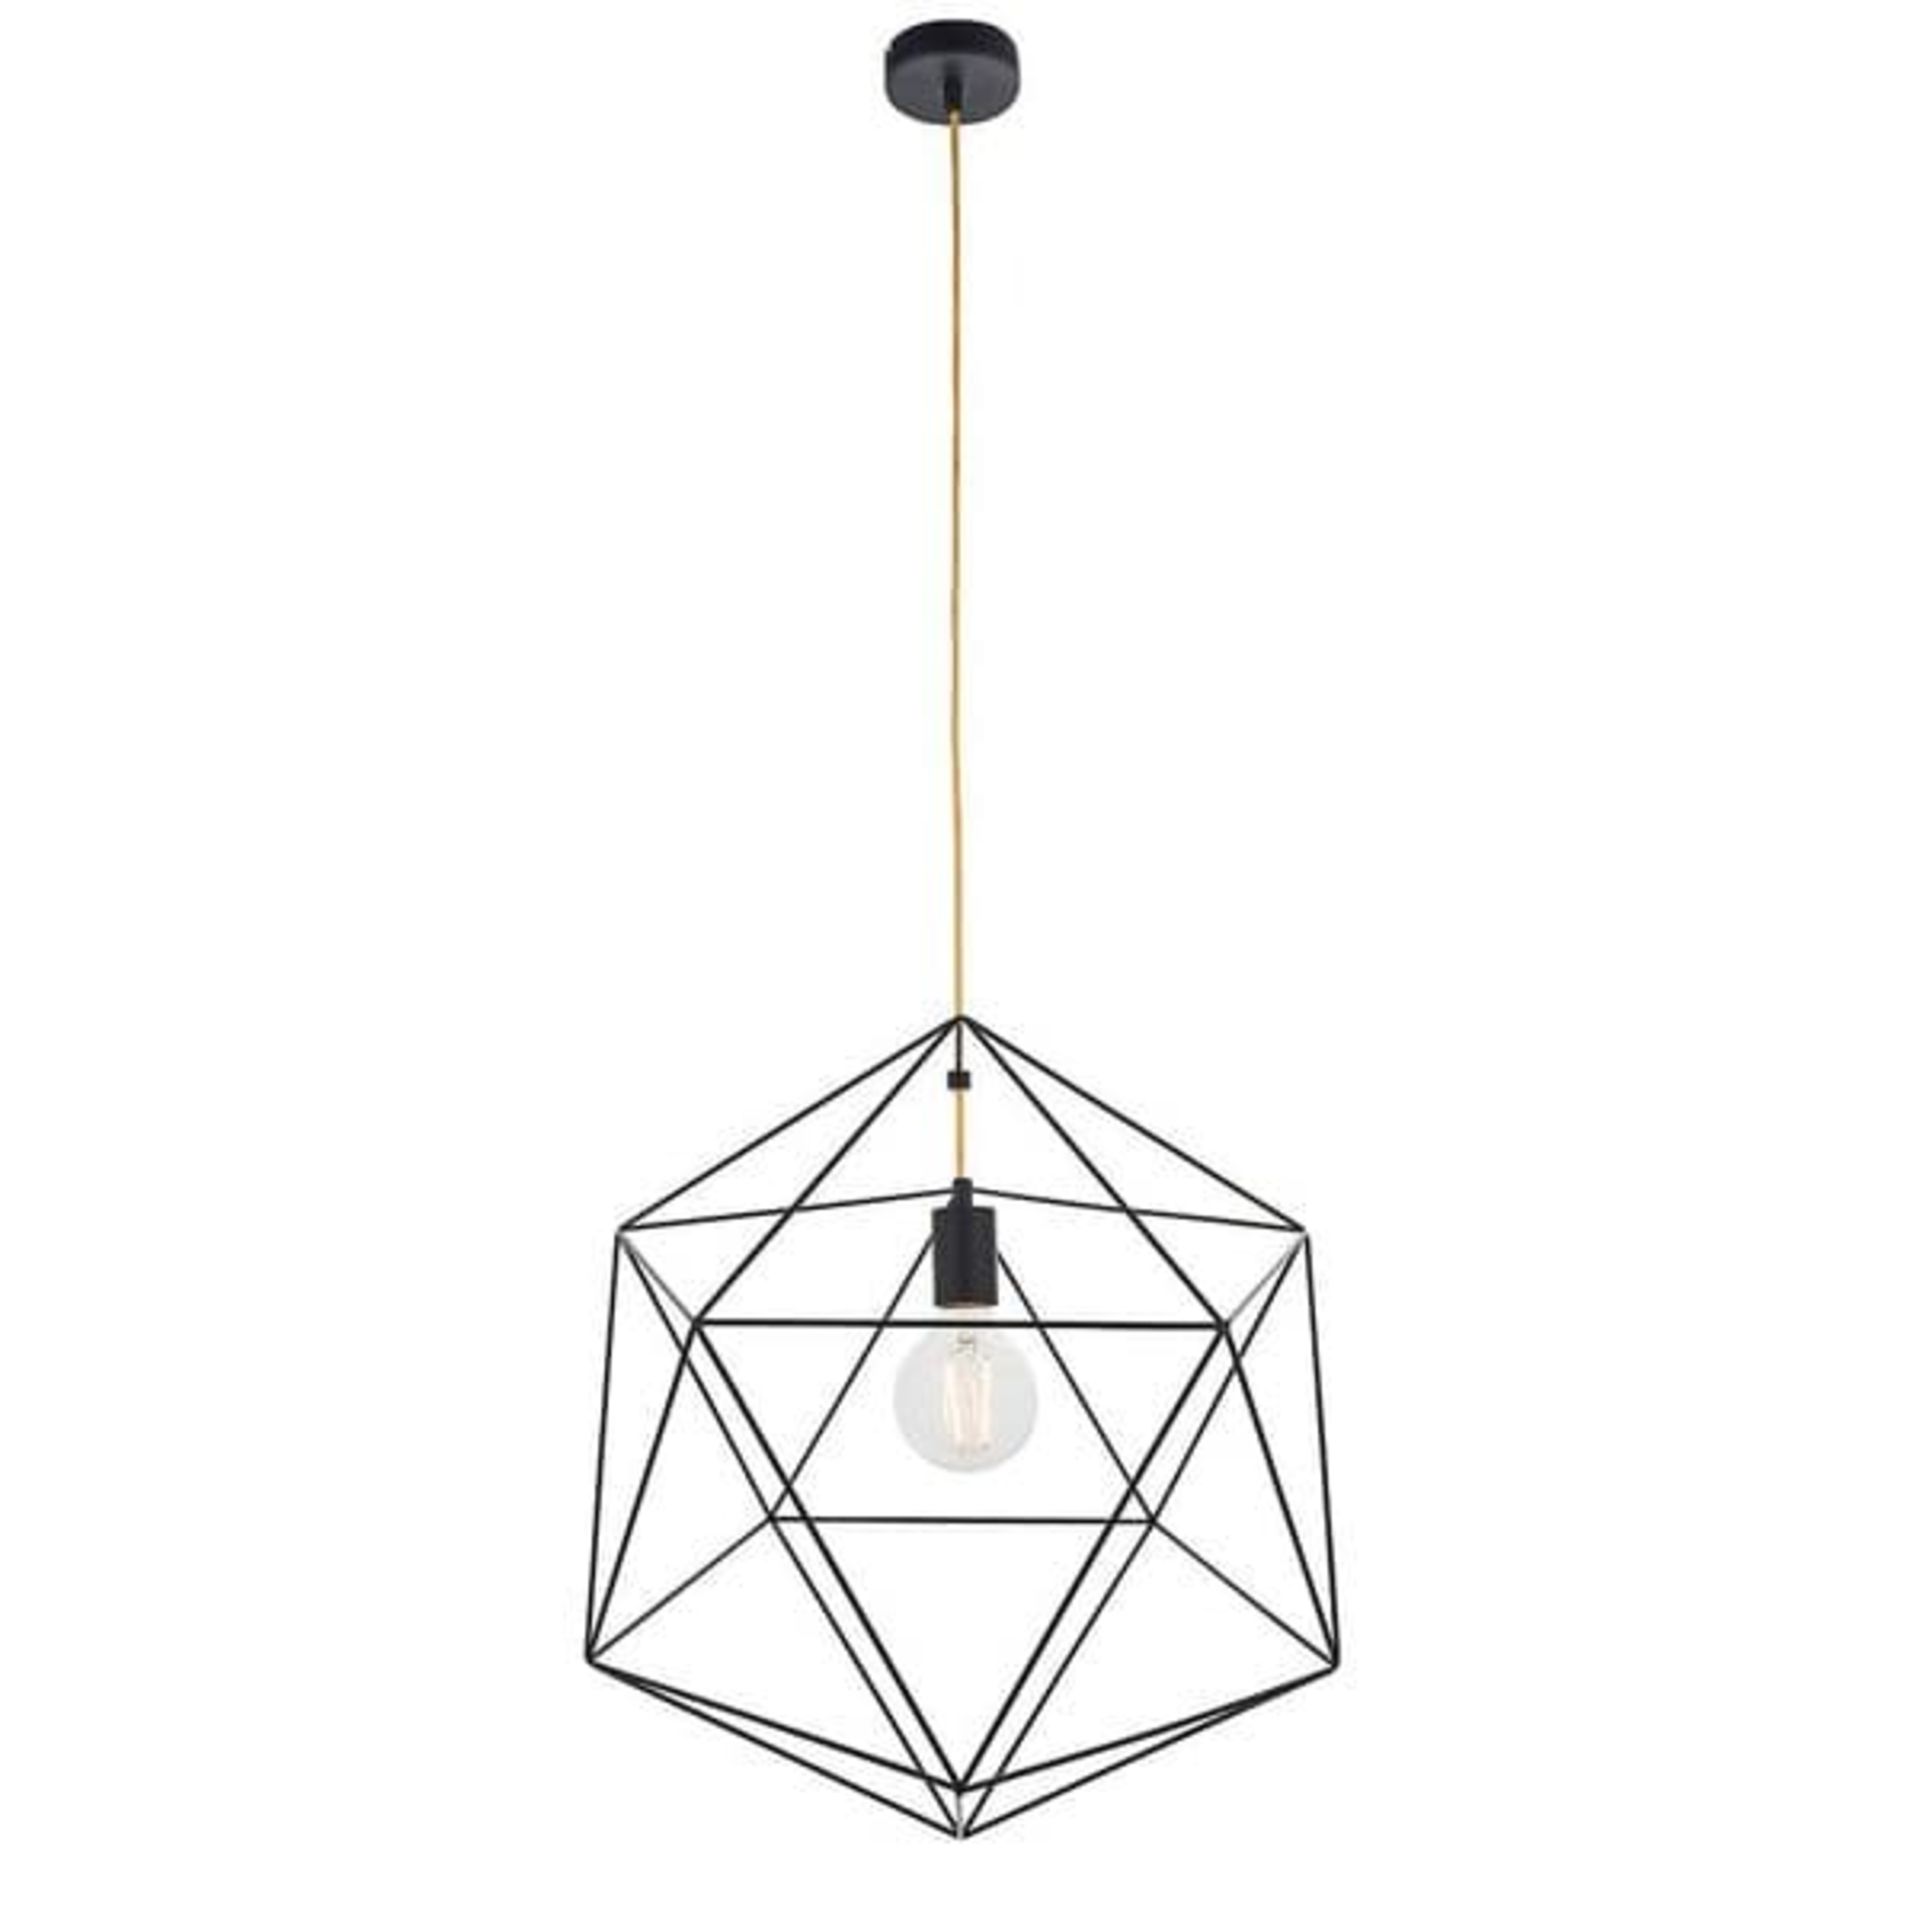 Endon 79625 Icosa Single Light Ceiling Pendant in Black FinishThis striking ceiling pendant features - Image 2 of 2